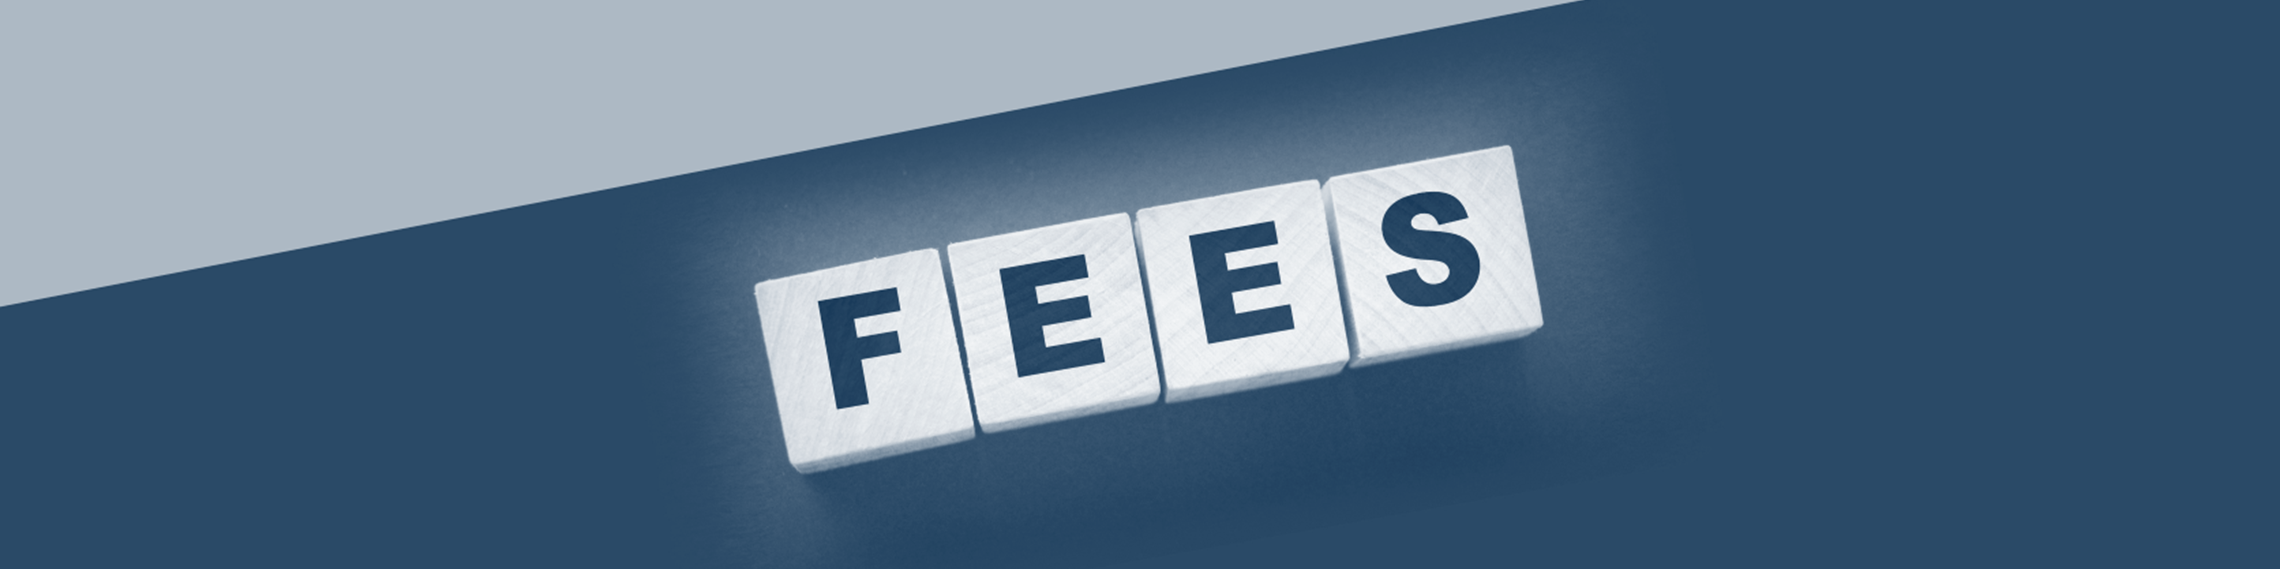 Image with the word Fees